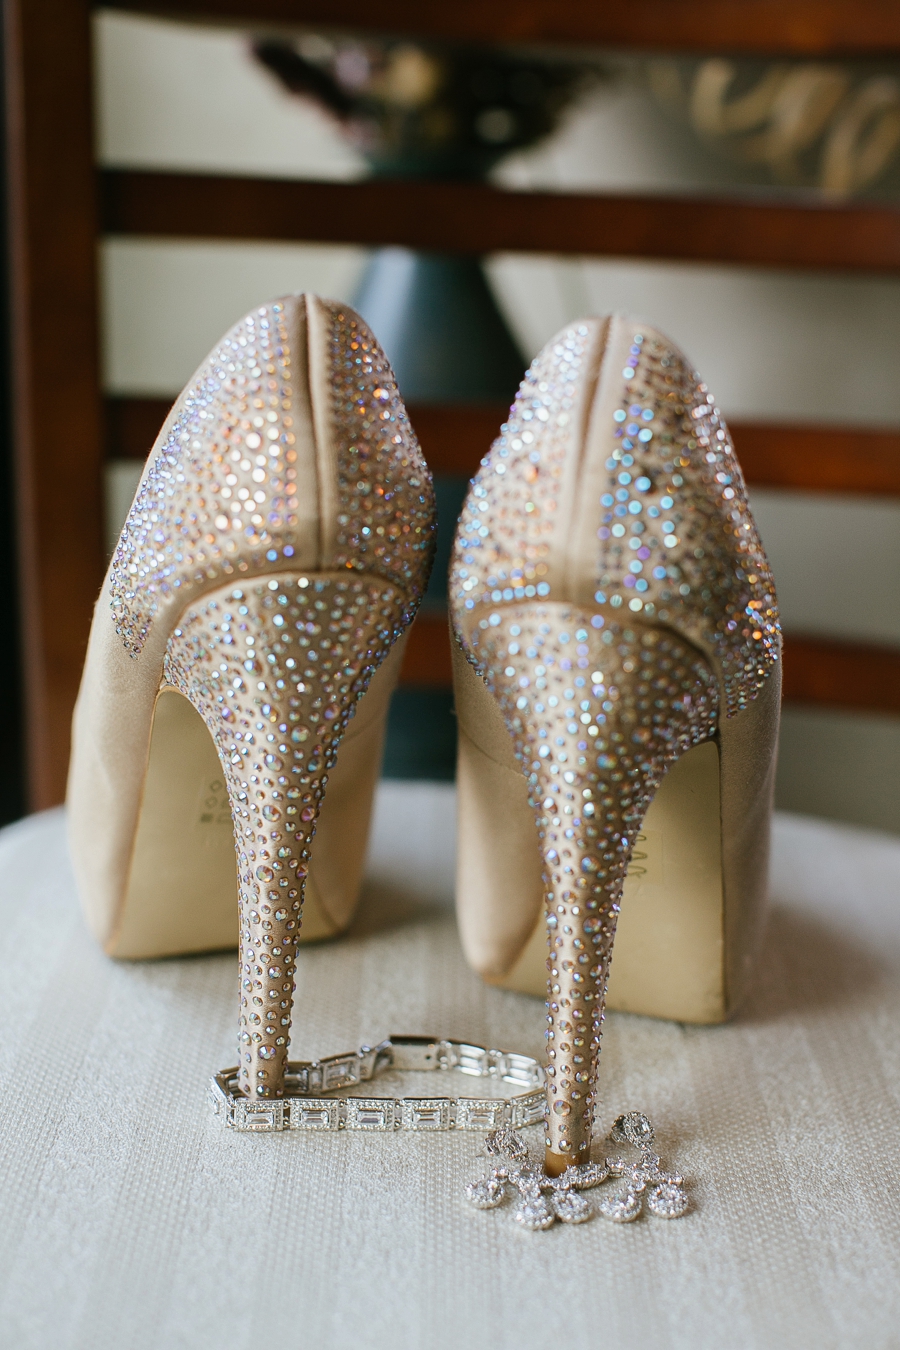 More information about "Part 4: Wedding Shoe Inspiration Photos"